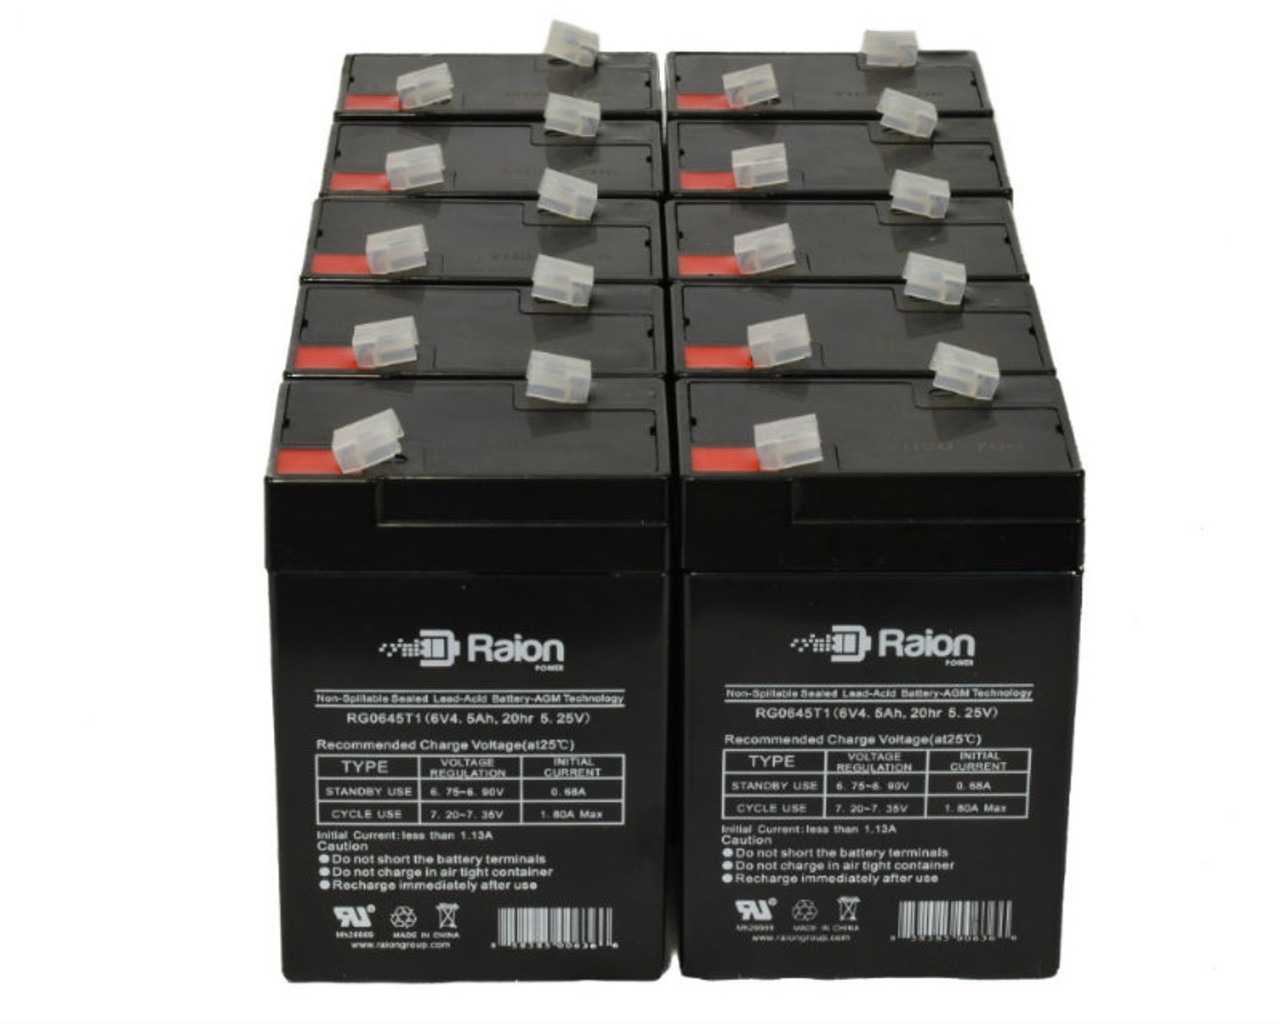 Raion Power 6V 4.5Ah Replacement Emergency Light Battery for Para Systems S65 - 10 Pack